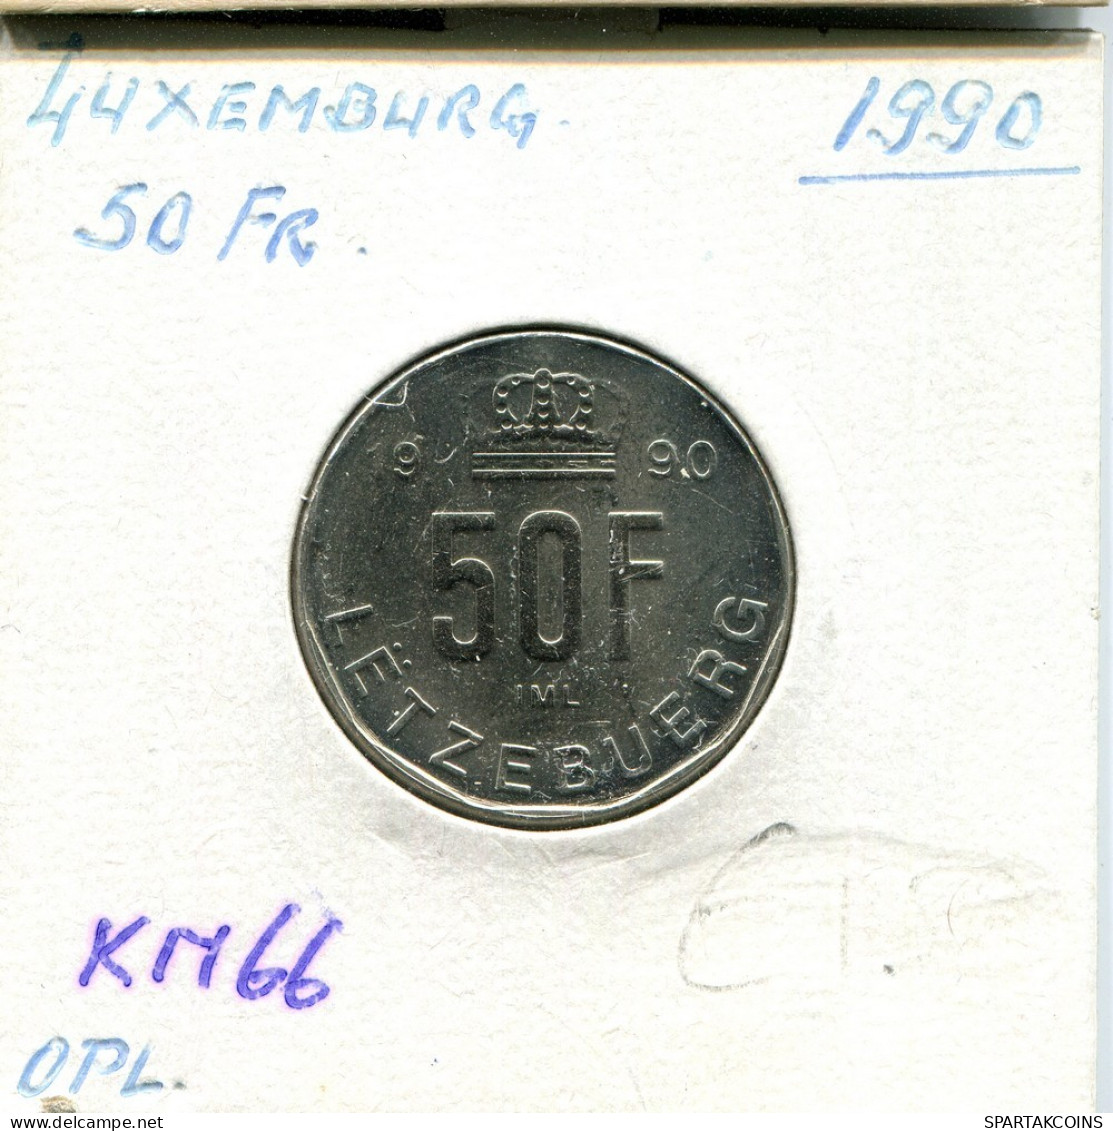 50 FRANCS 1990 LUXEMBURG LUXEMBOURG Münze #AT253.D.A - Luxemburg